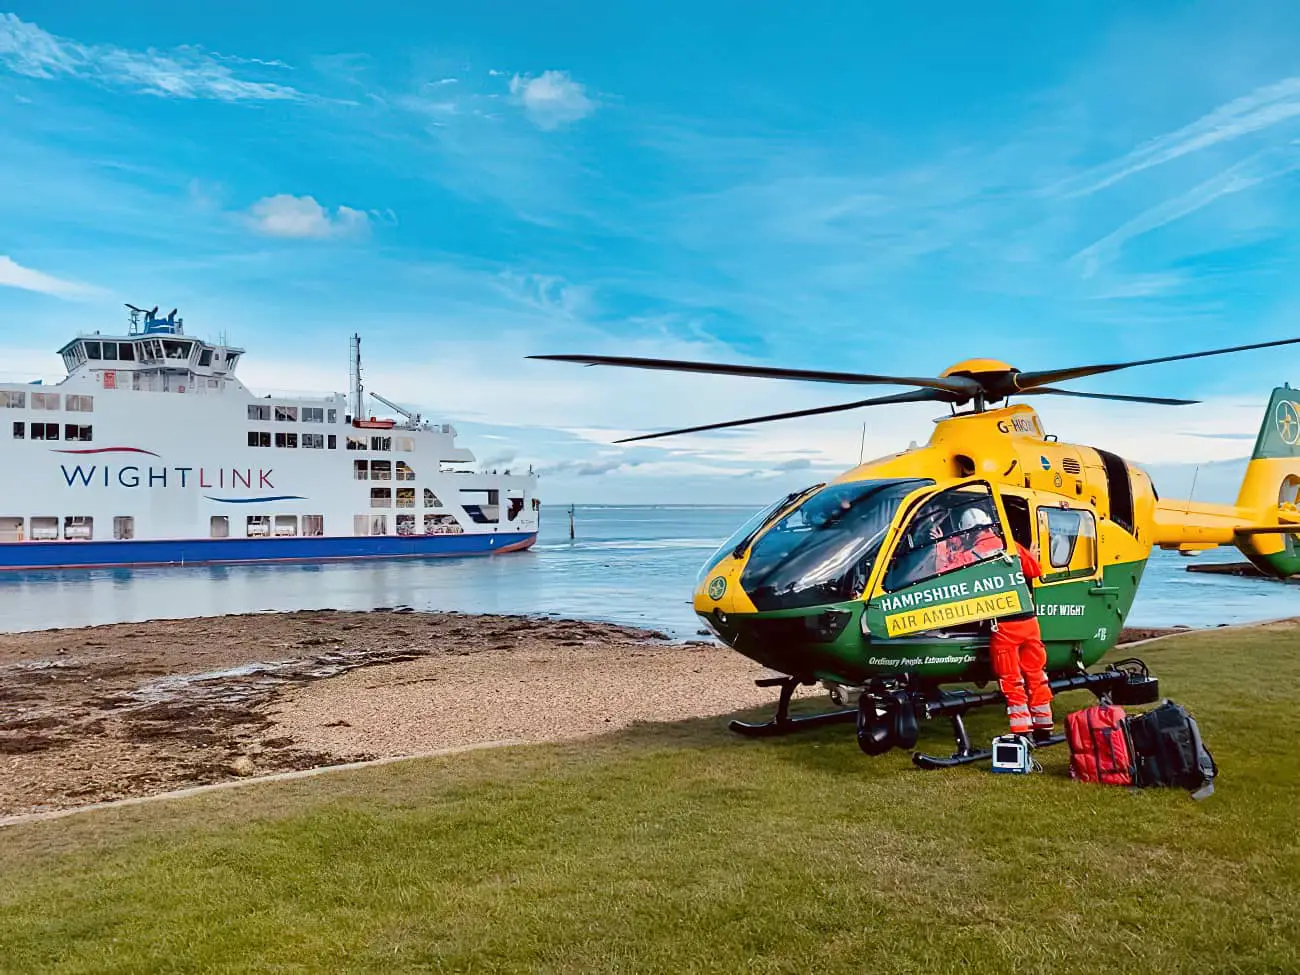 Wightlink ferry in background with Air Ambulance in foreground